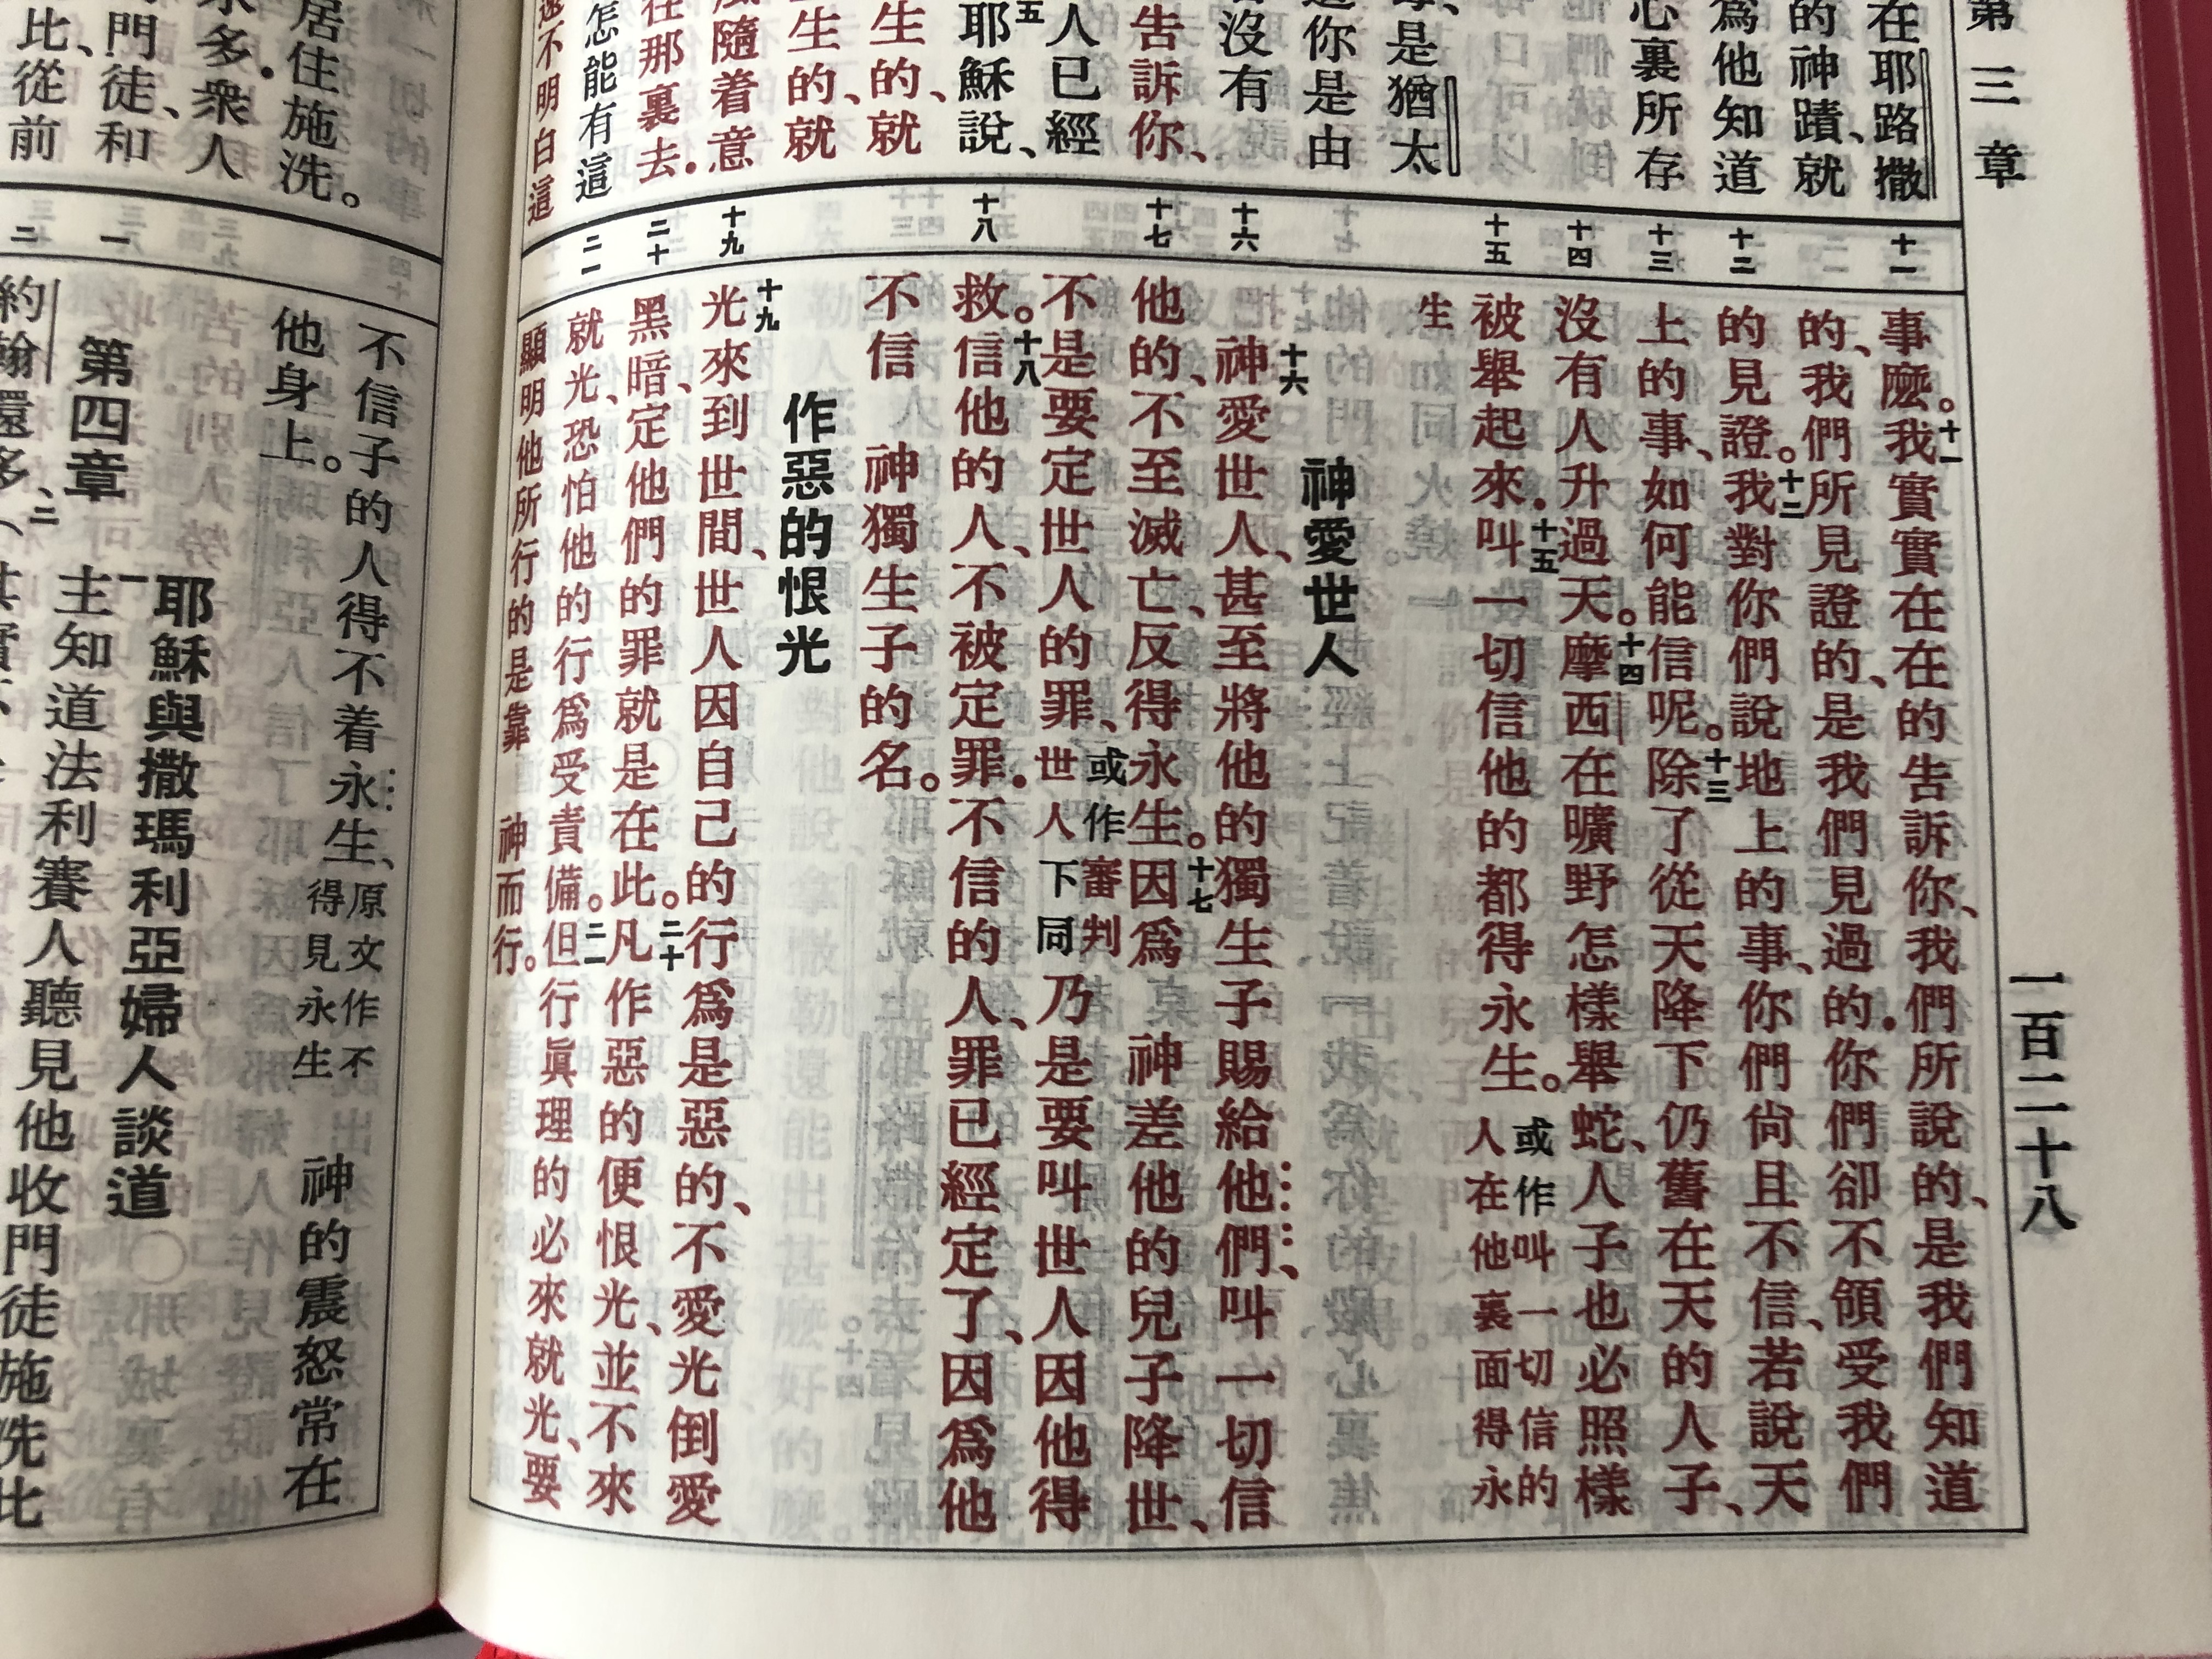 the-holy-bible-chinese-union-version-shen-edition-with-words-of-christ-in-red-black-hardcover-red-edges-cu63ar-bsm-2015-15-.jpg